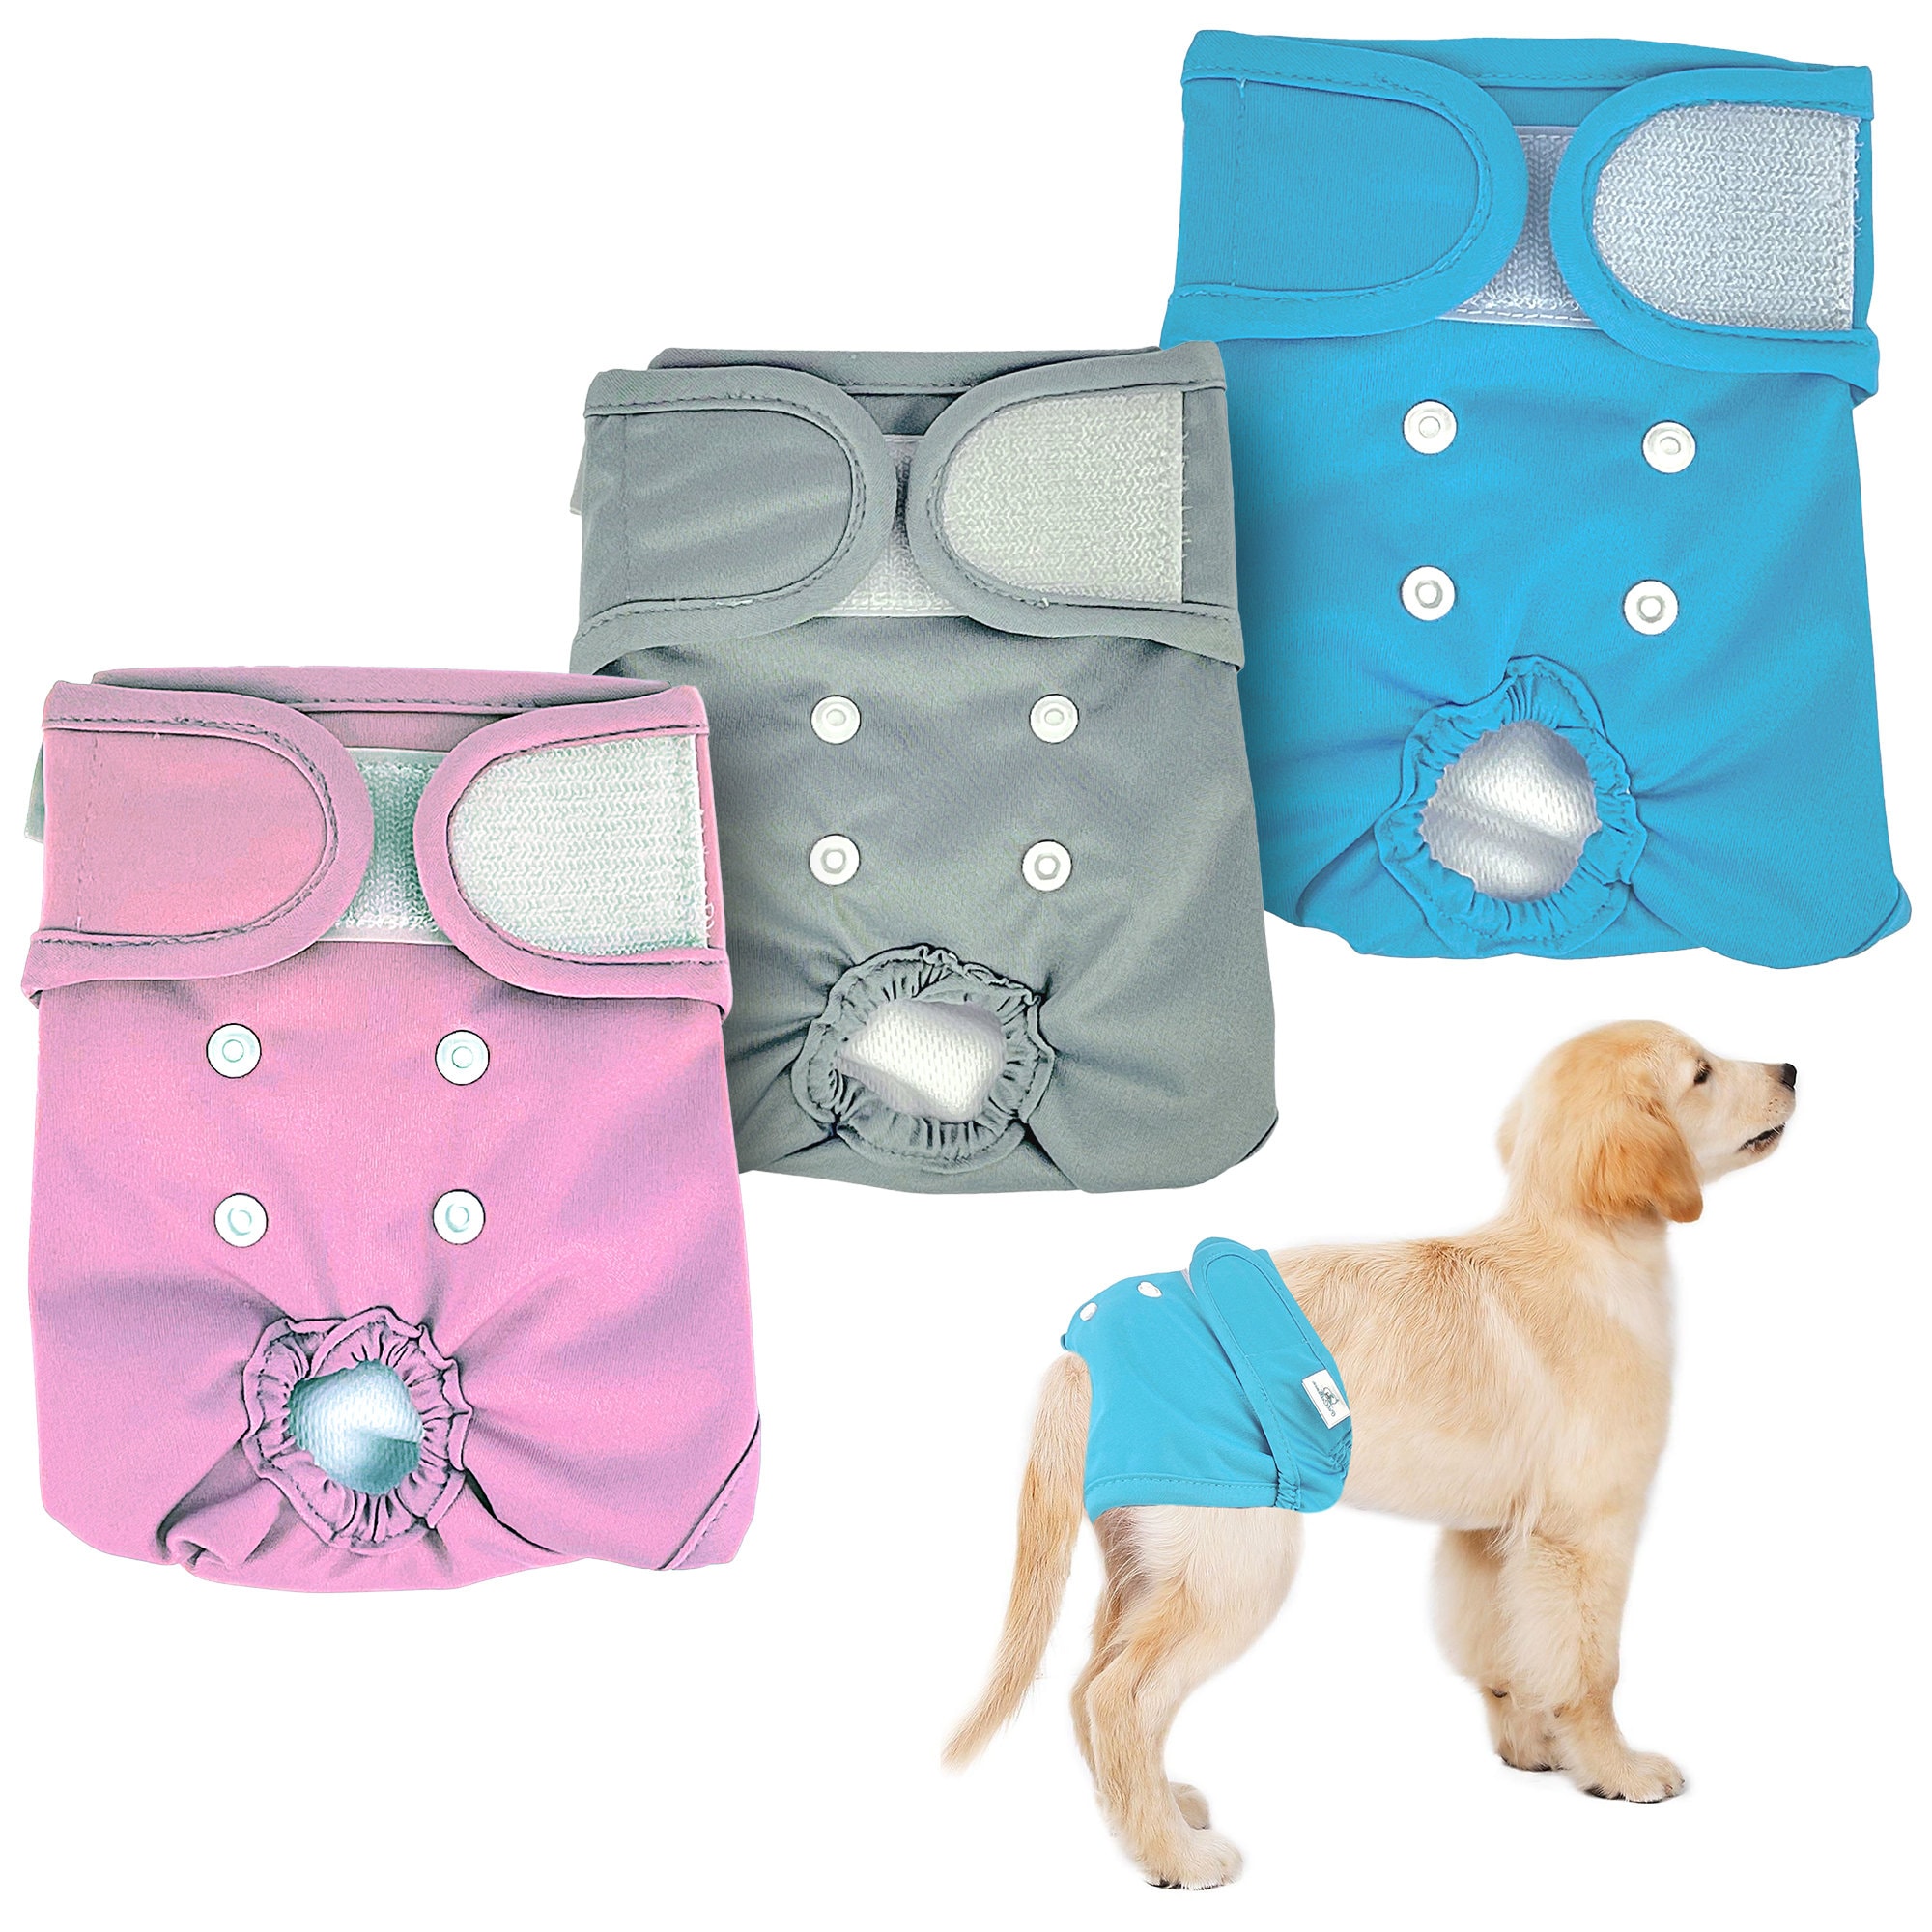 HORYDIA Dog Nappies Soft Reusable Dog Diapers Physiological Pants Washable Sanitary Shorts For Pet. AQK1, L 